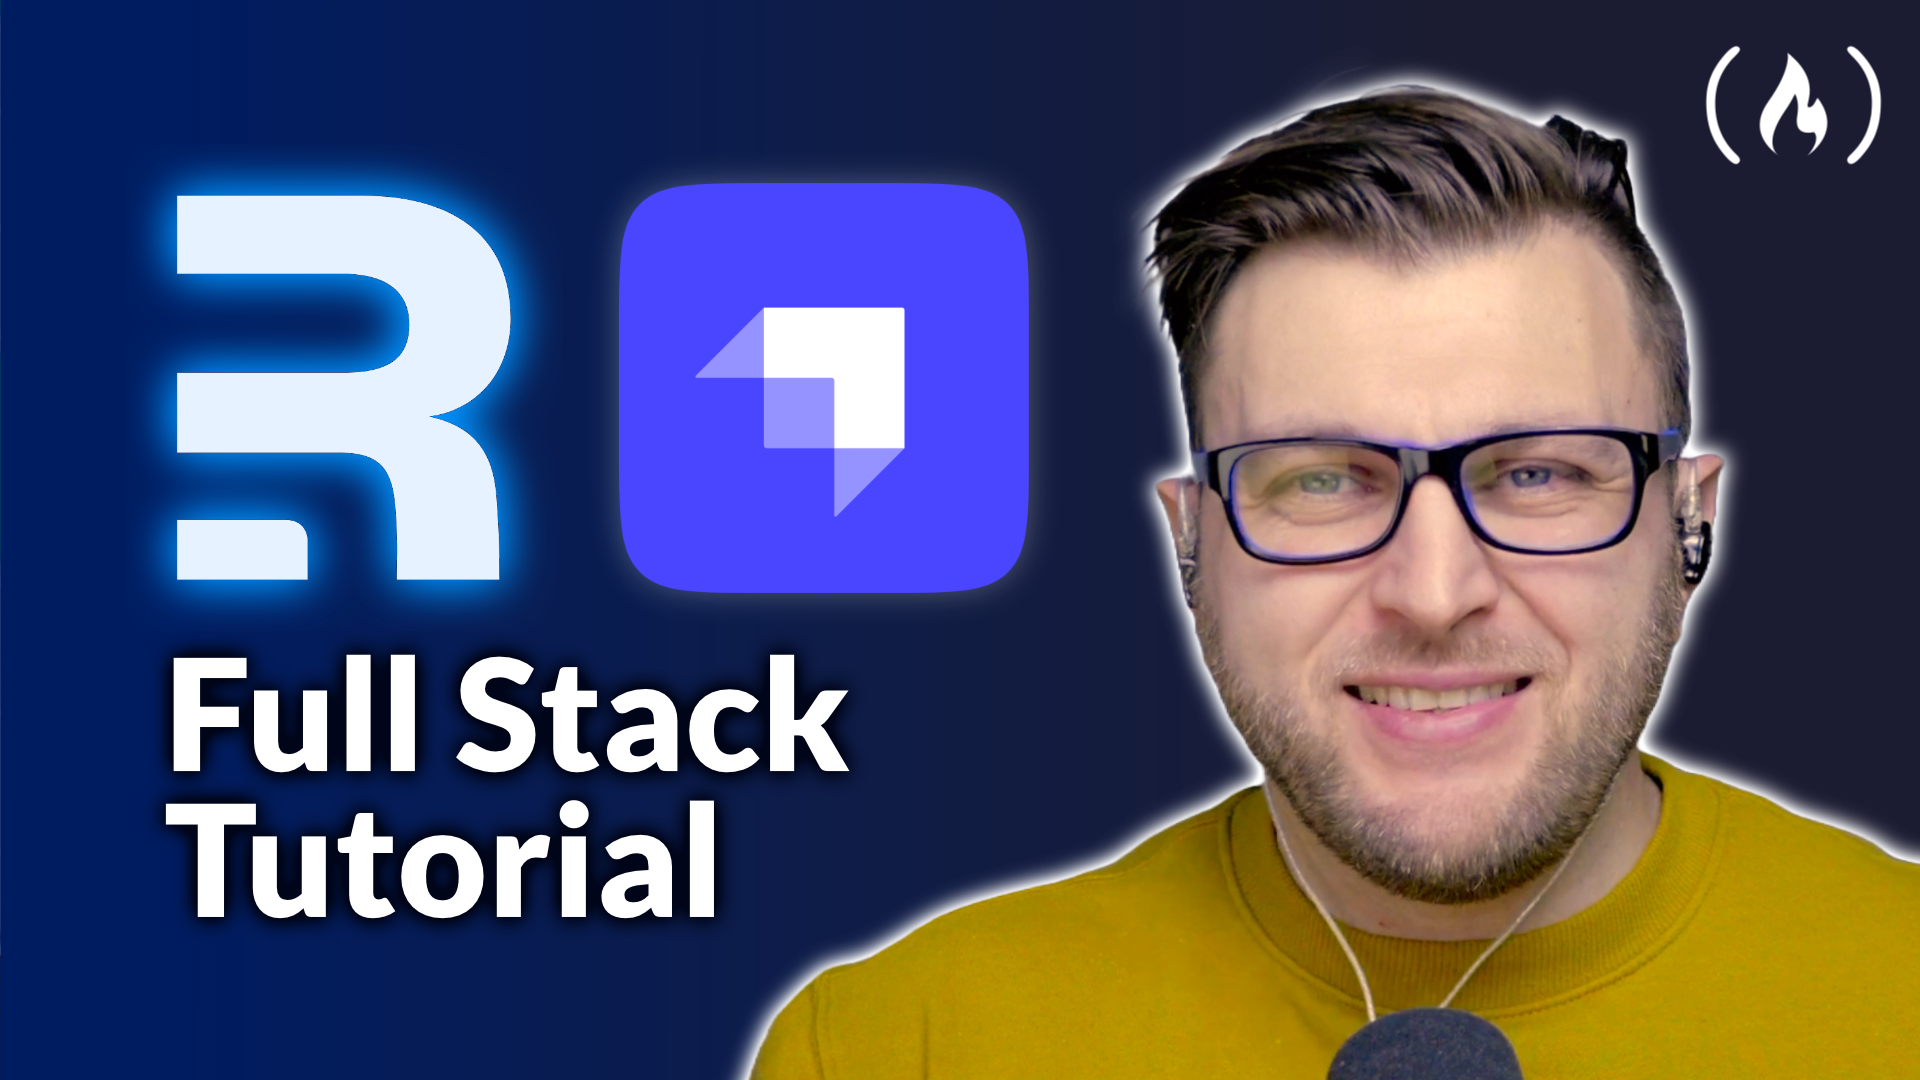 Image for Use Remix and Strapi to Create Full Stack Apps